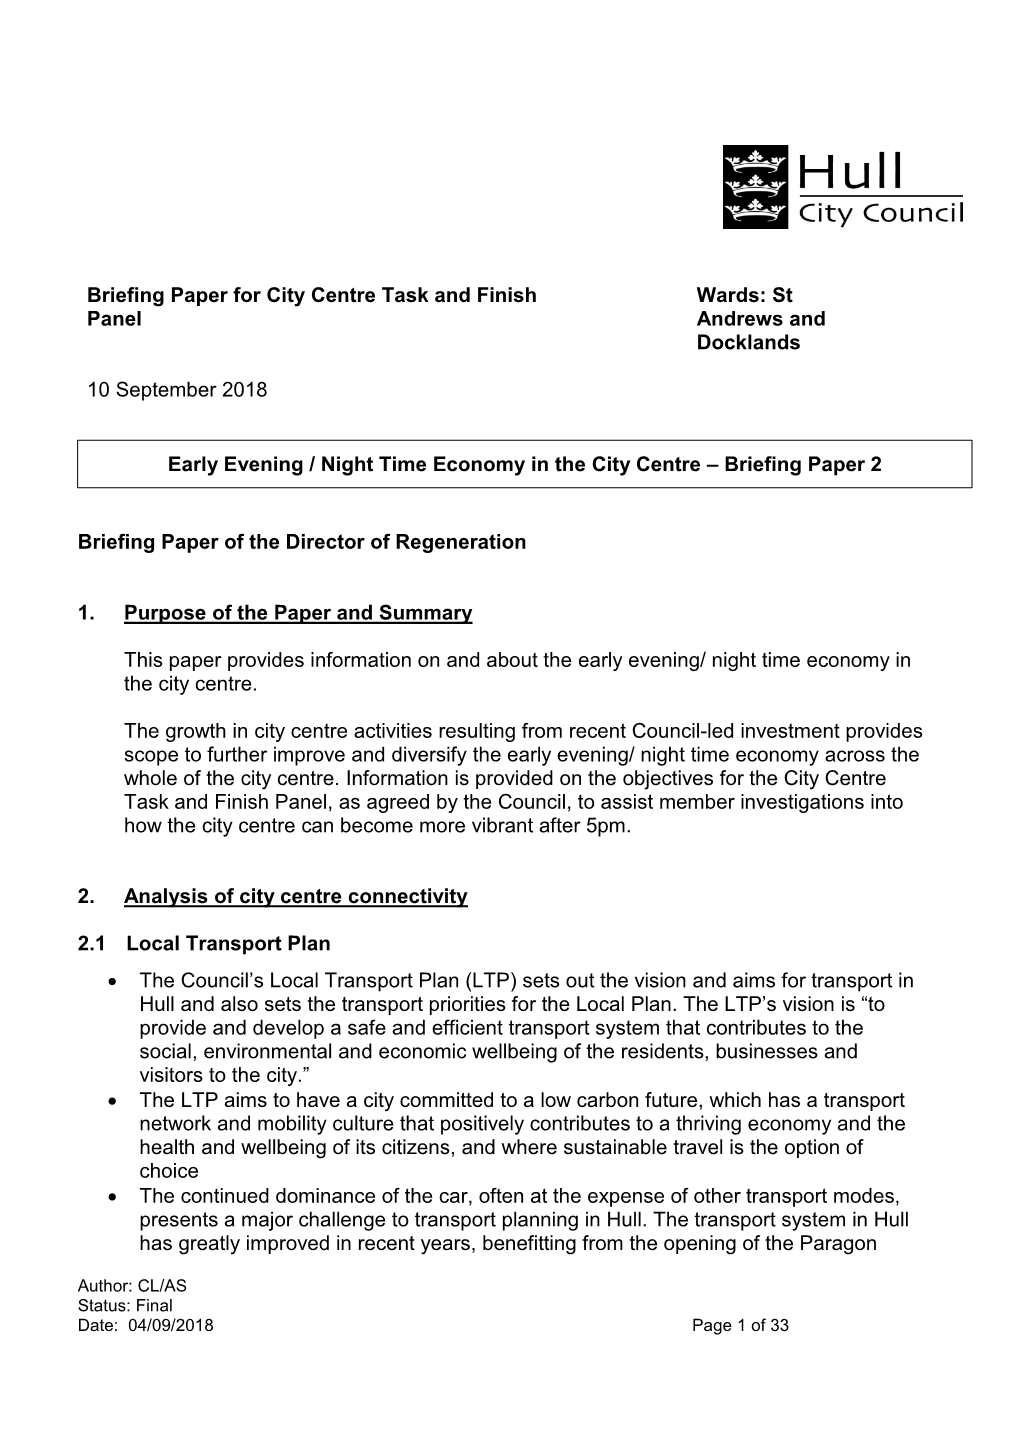 City Centre Briefing Paper